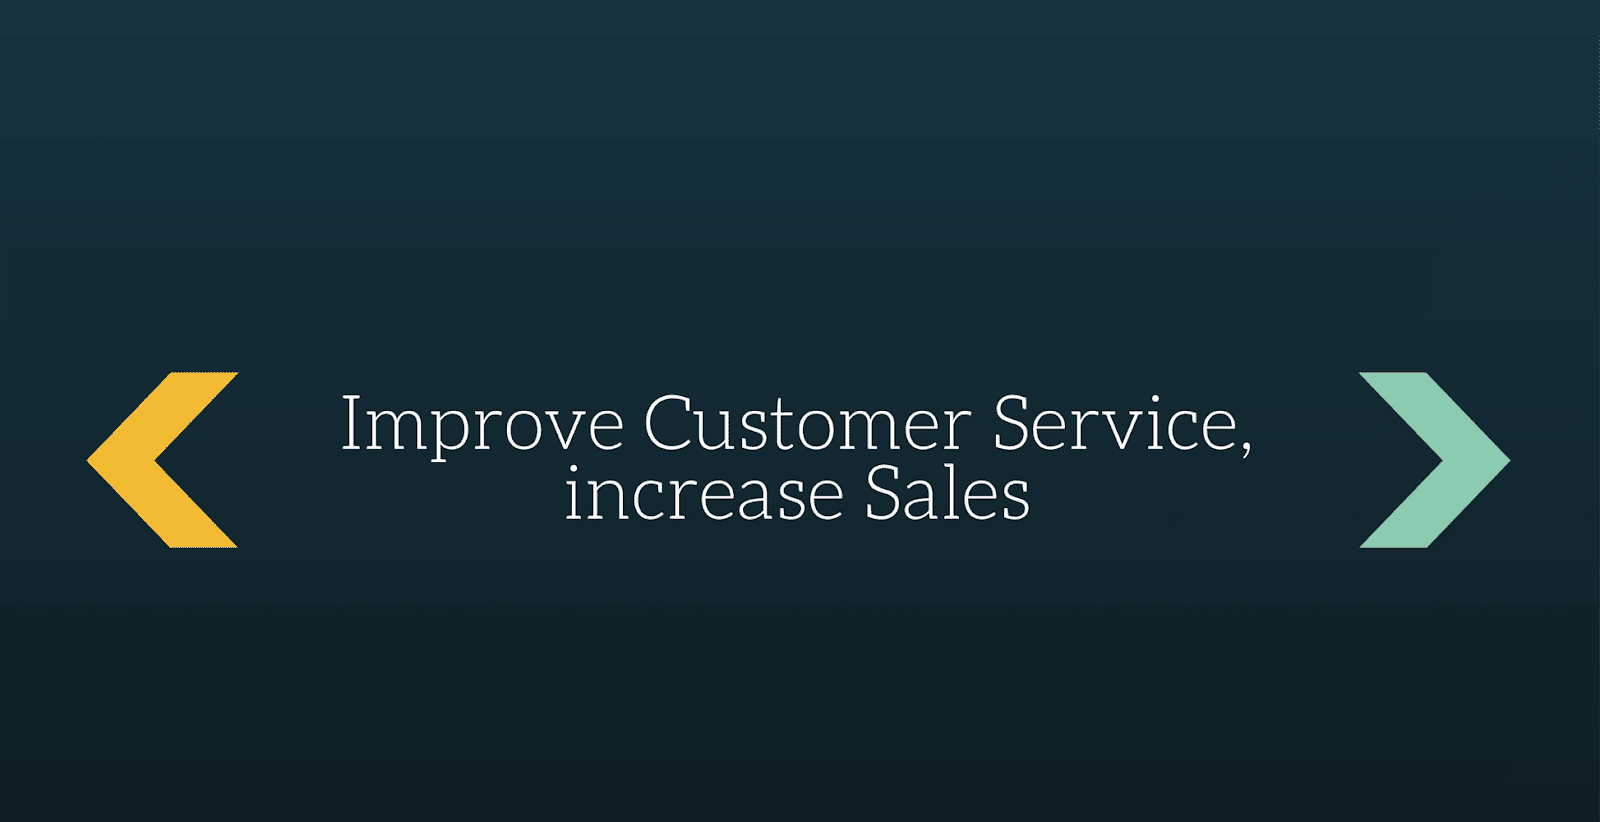 Why is performing customer service duties important to enterprises?